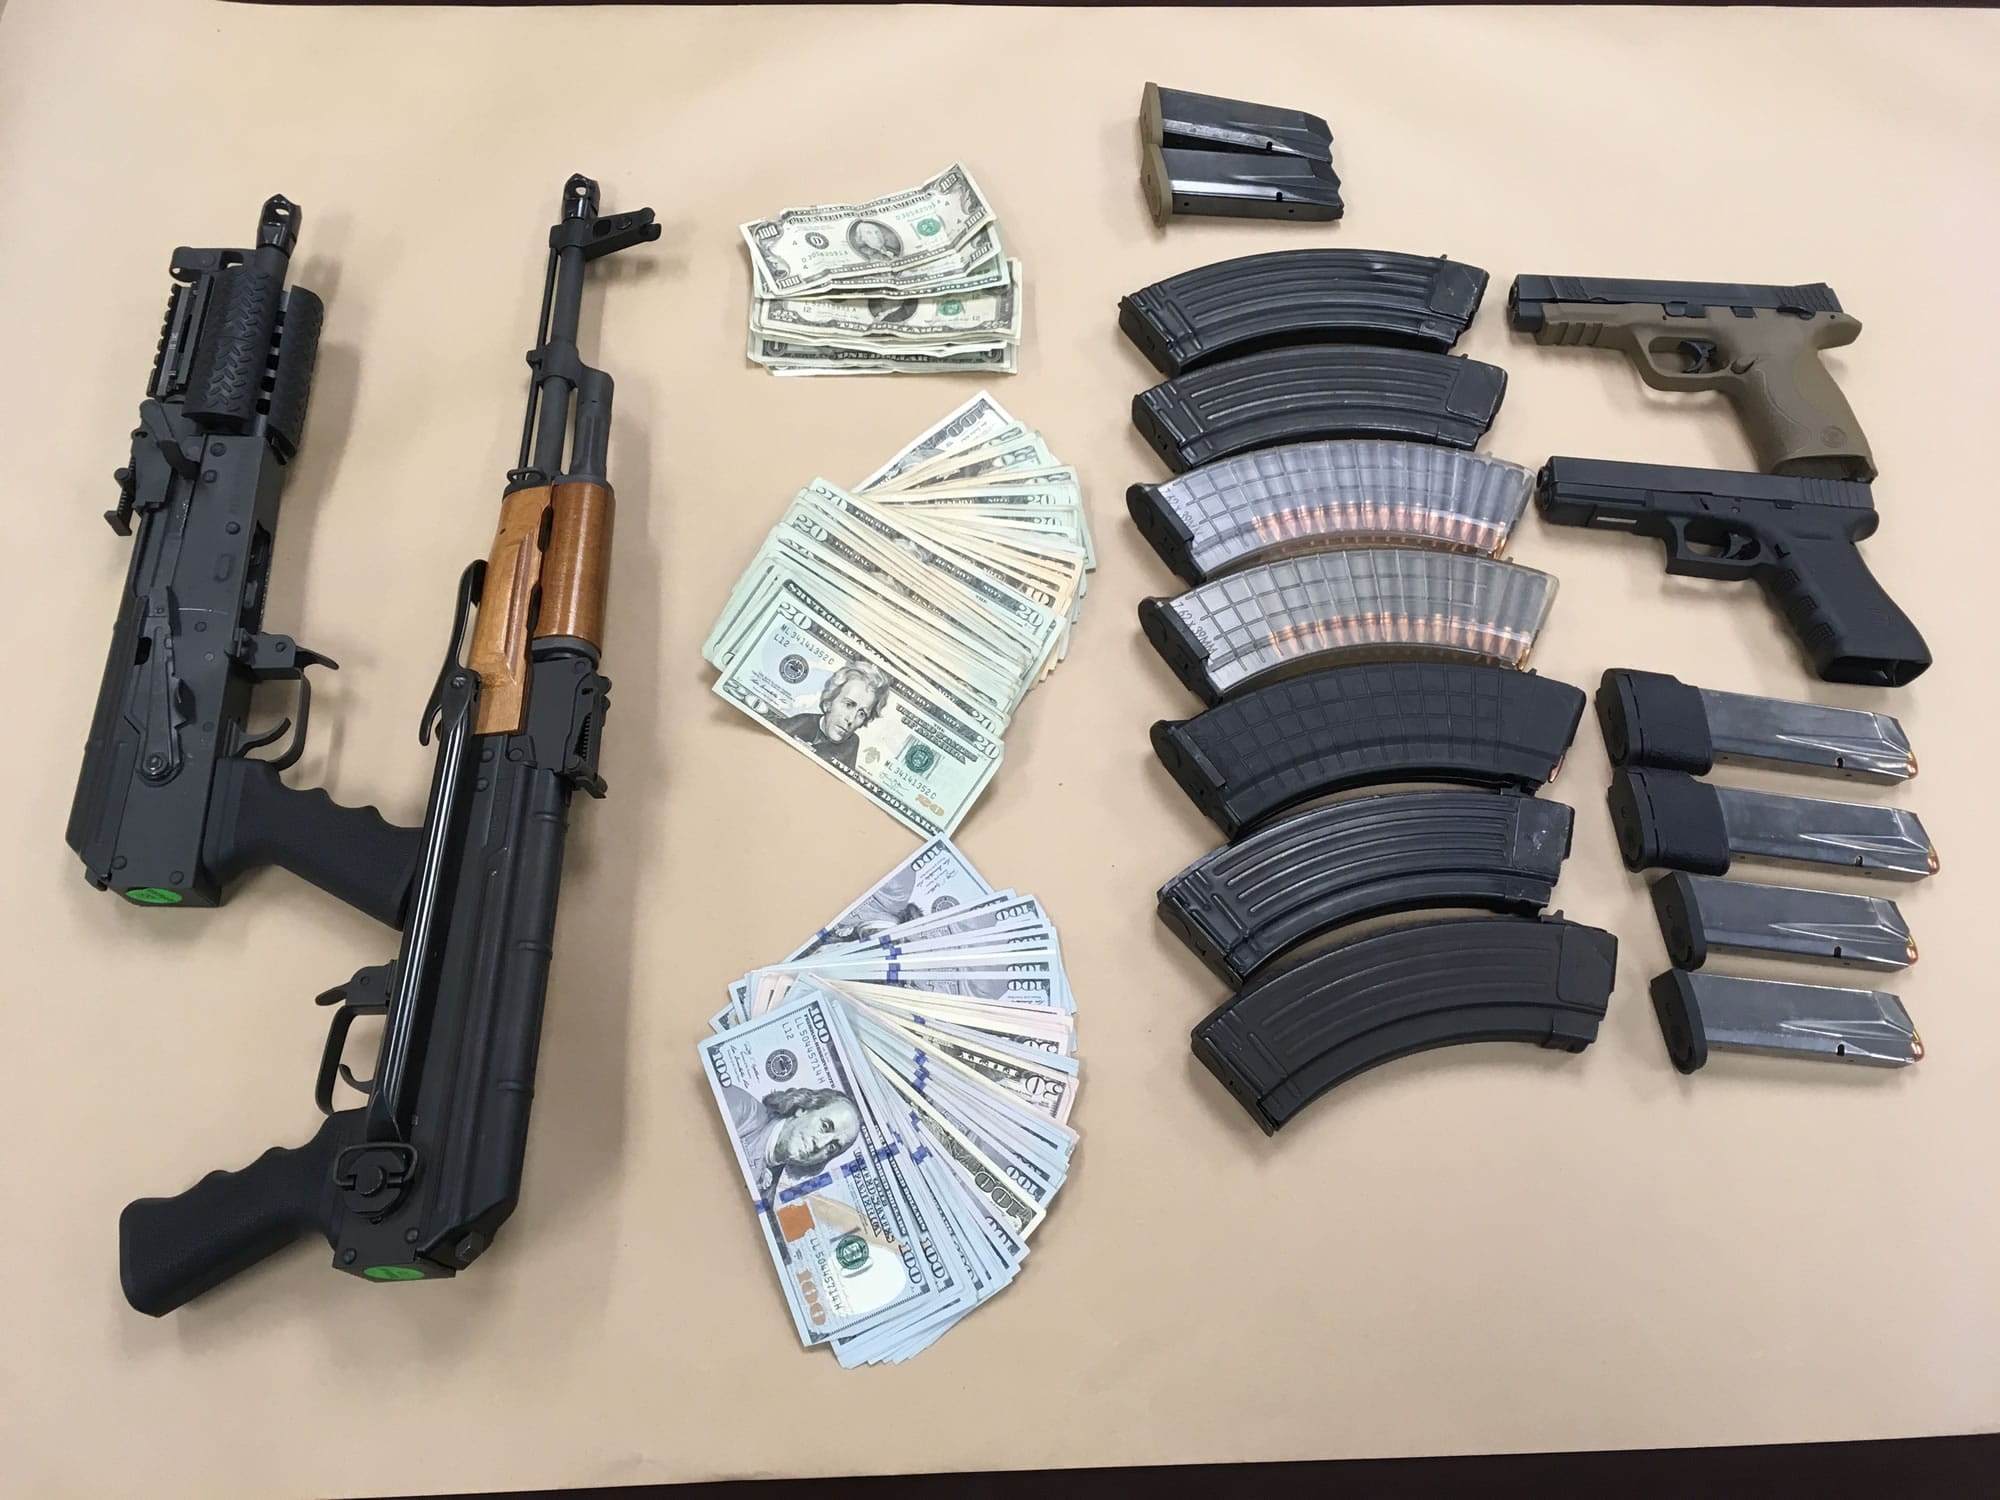 Firearms and cash seized Tuesday as part of a drug trafficking investigation.